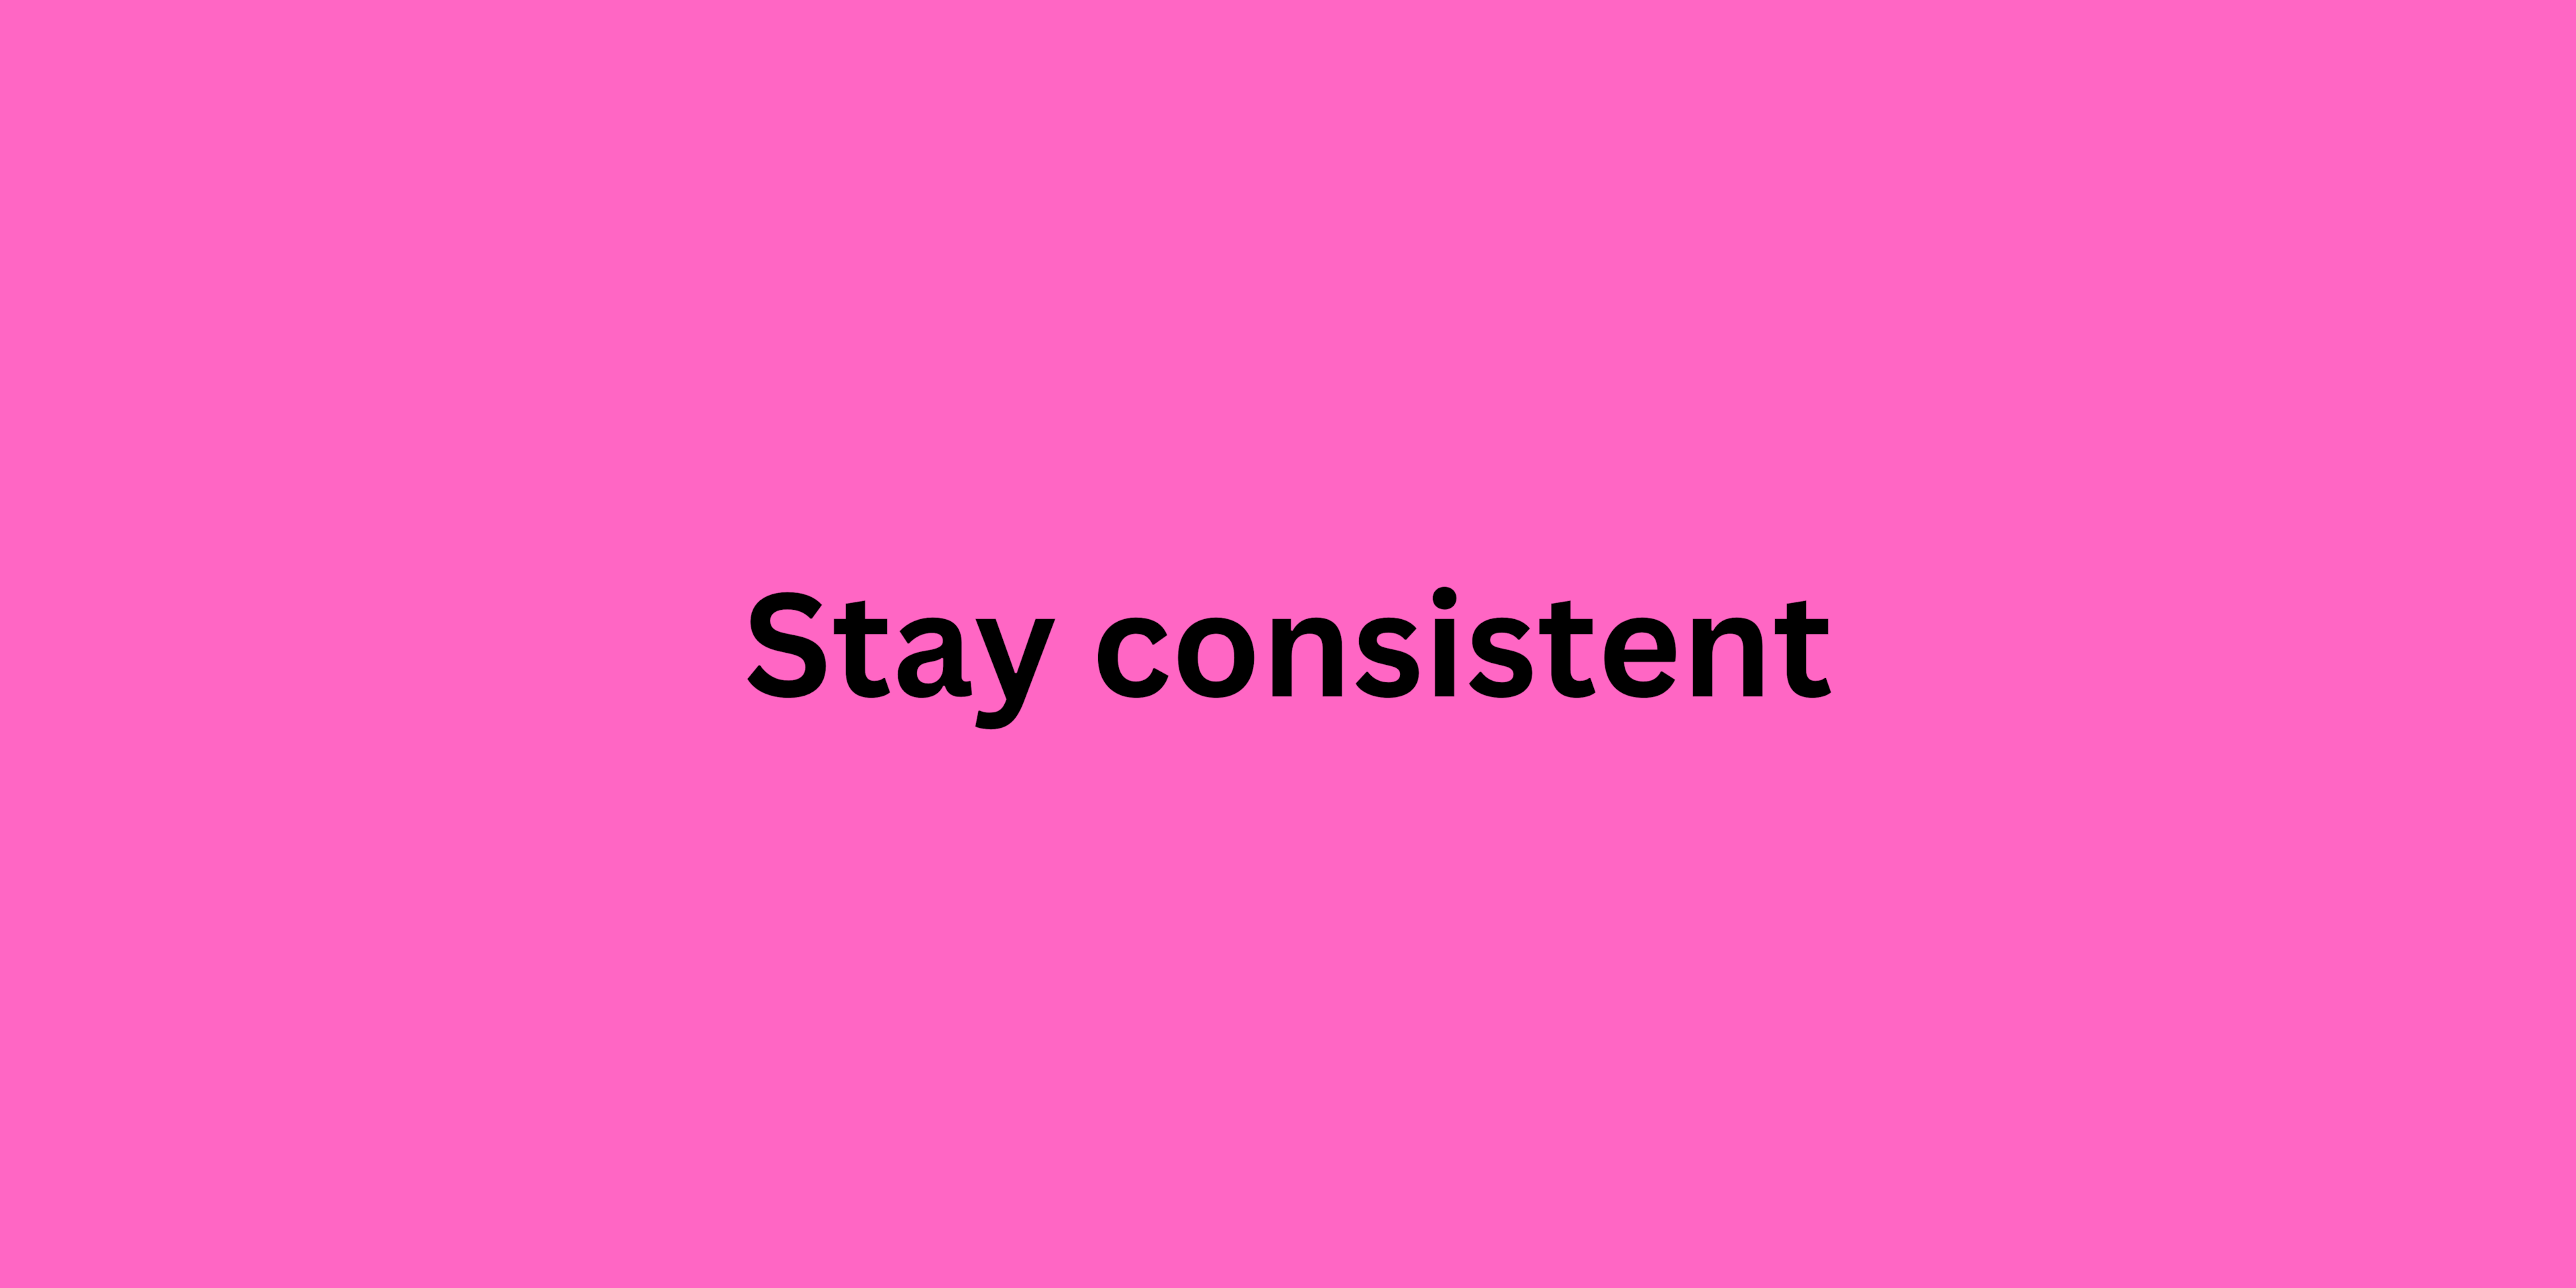 Stay consistent